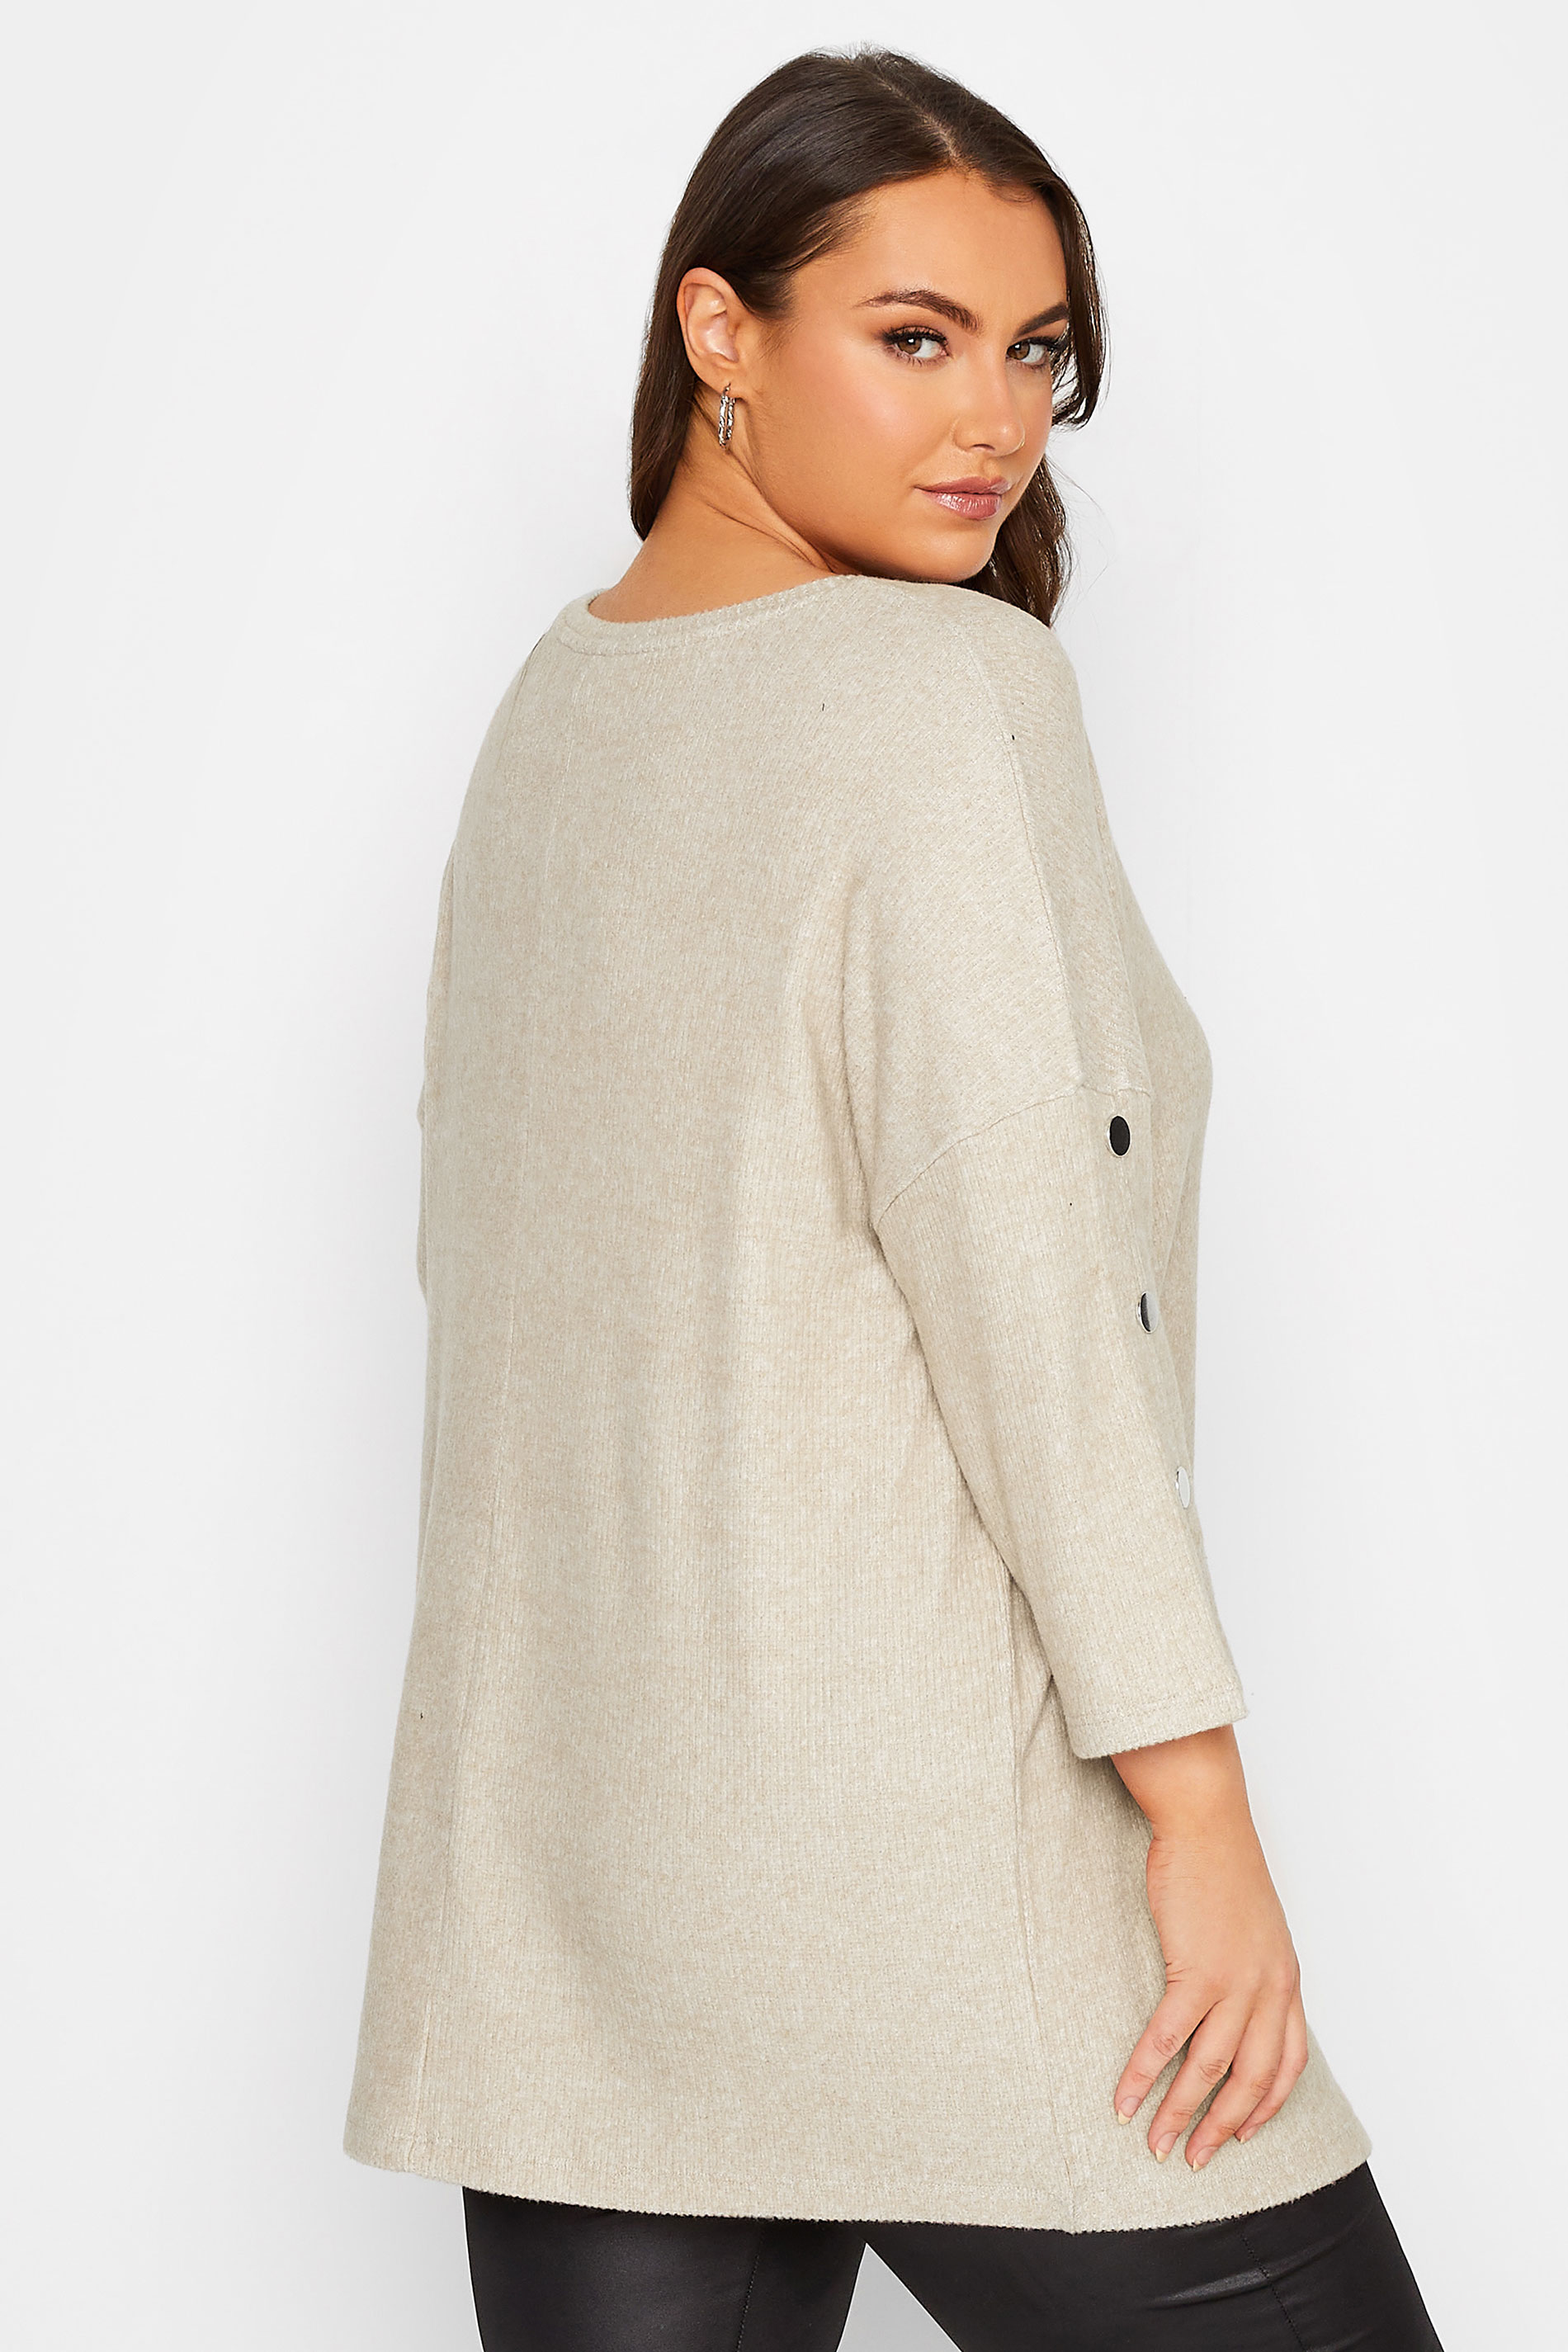 YOURS Curve Beige Brown Button Detail Soft Touch Top | Yours Clothing 3